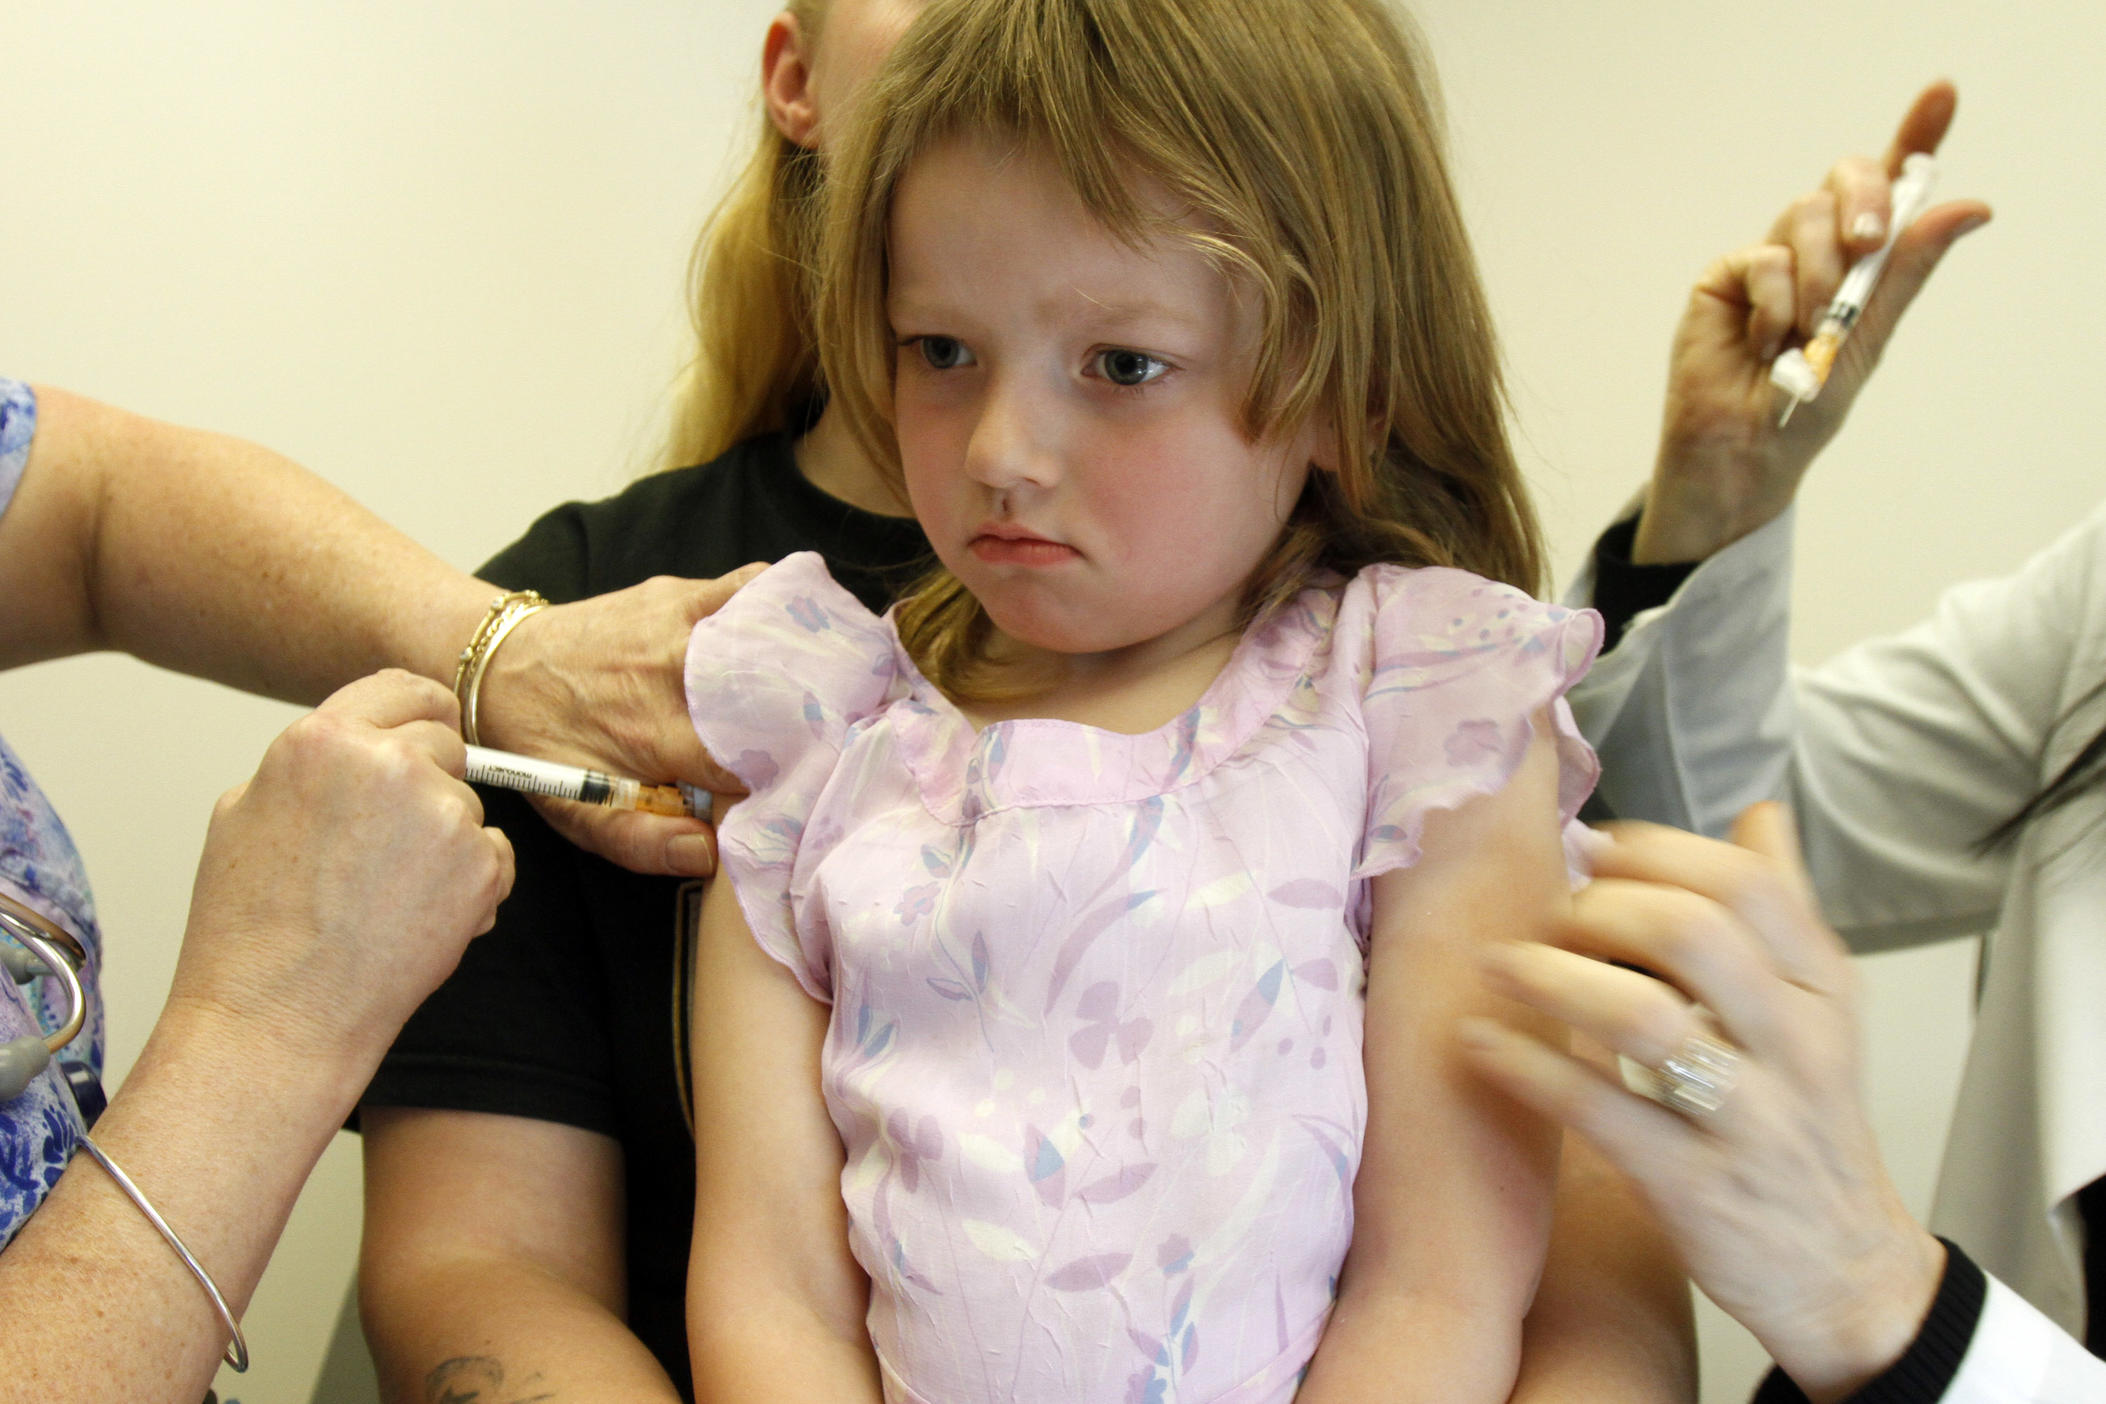 A young girl gets a vaccine in her right shoulder